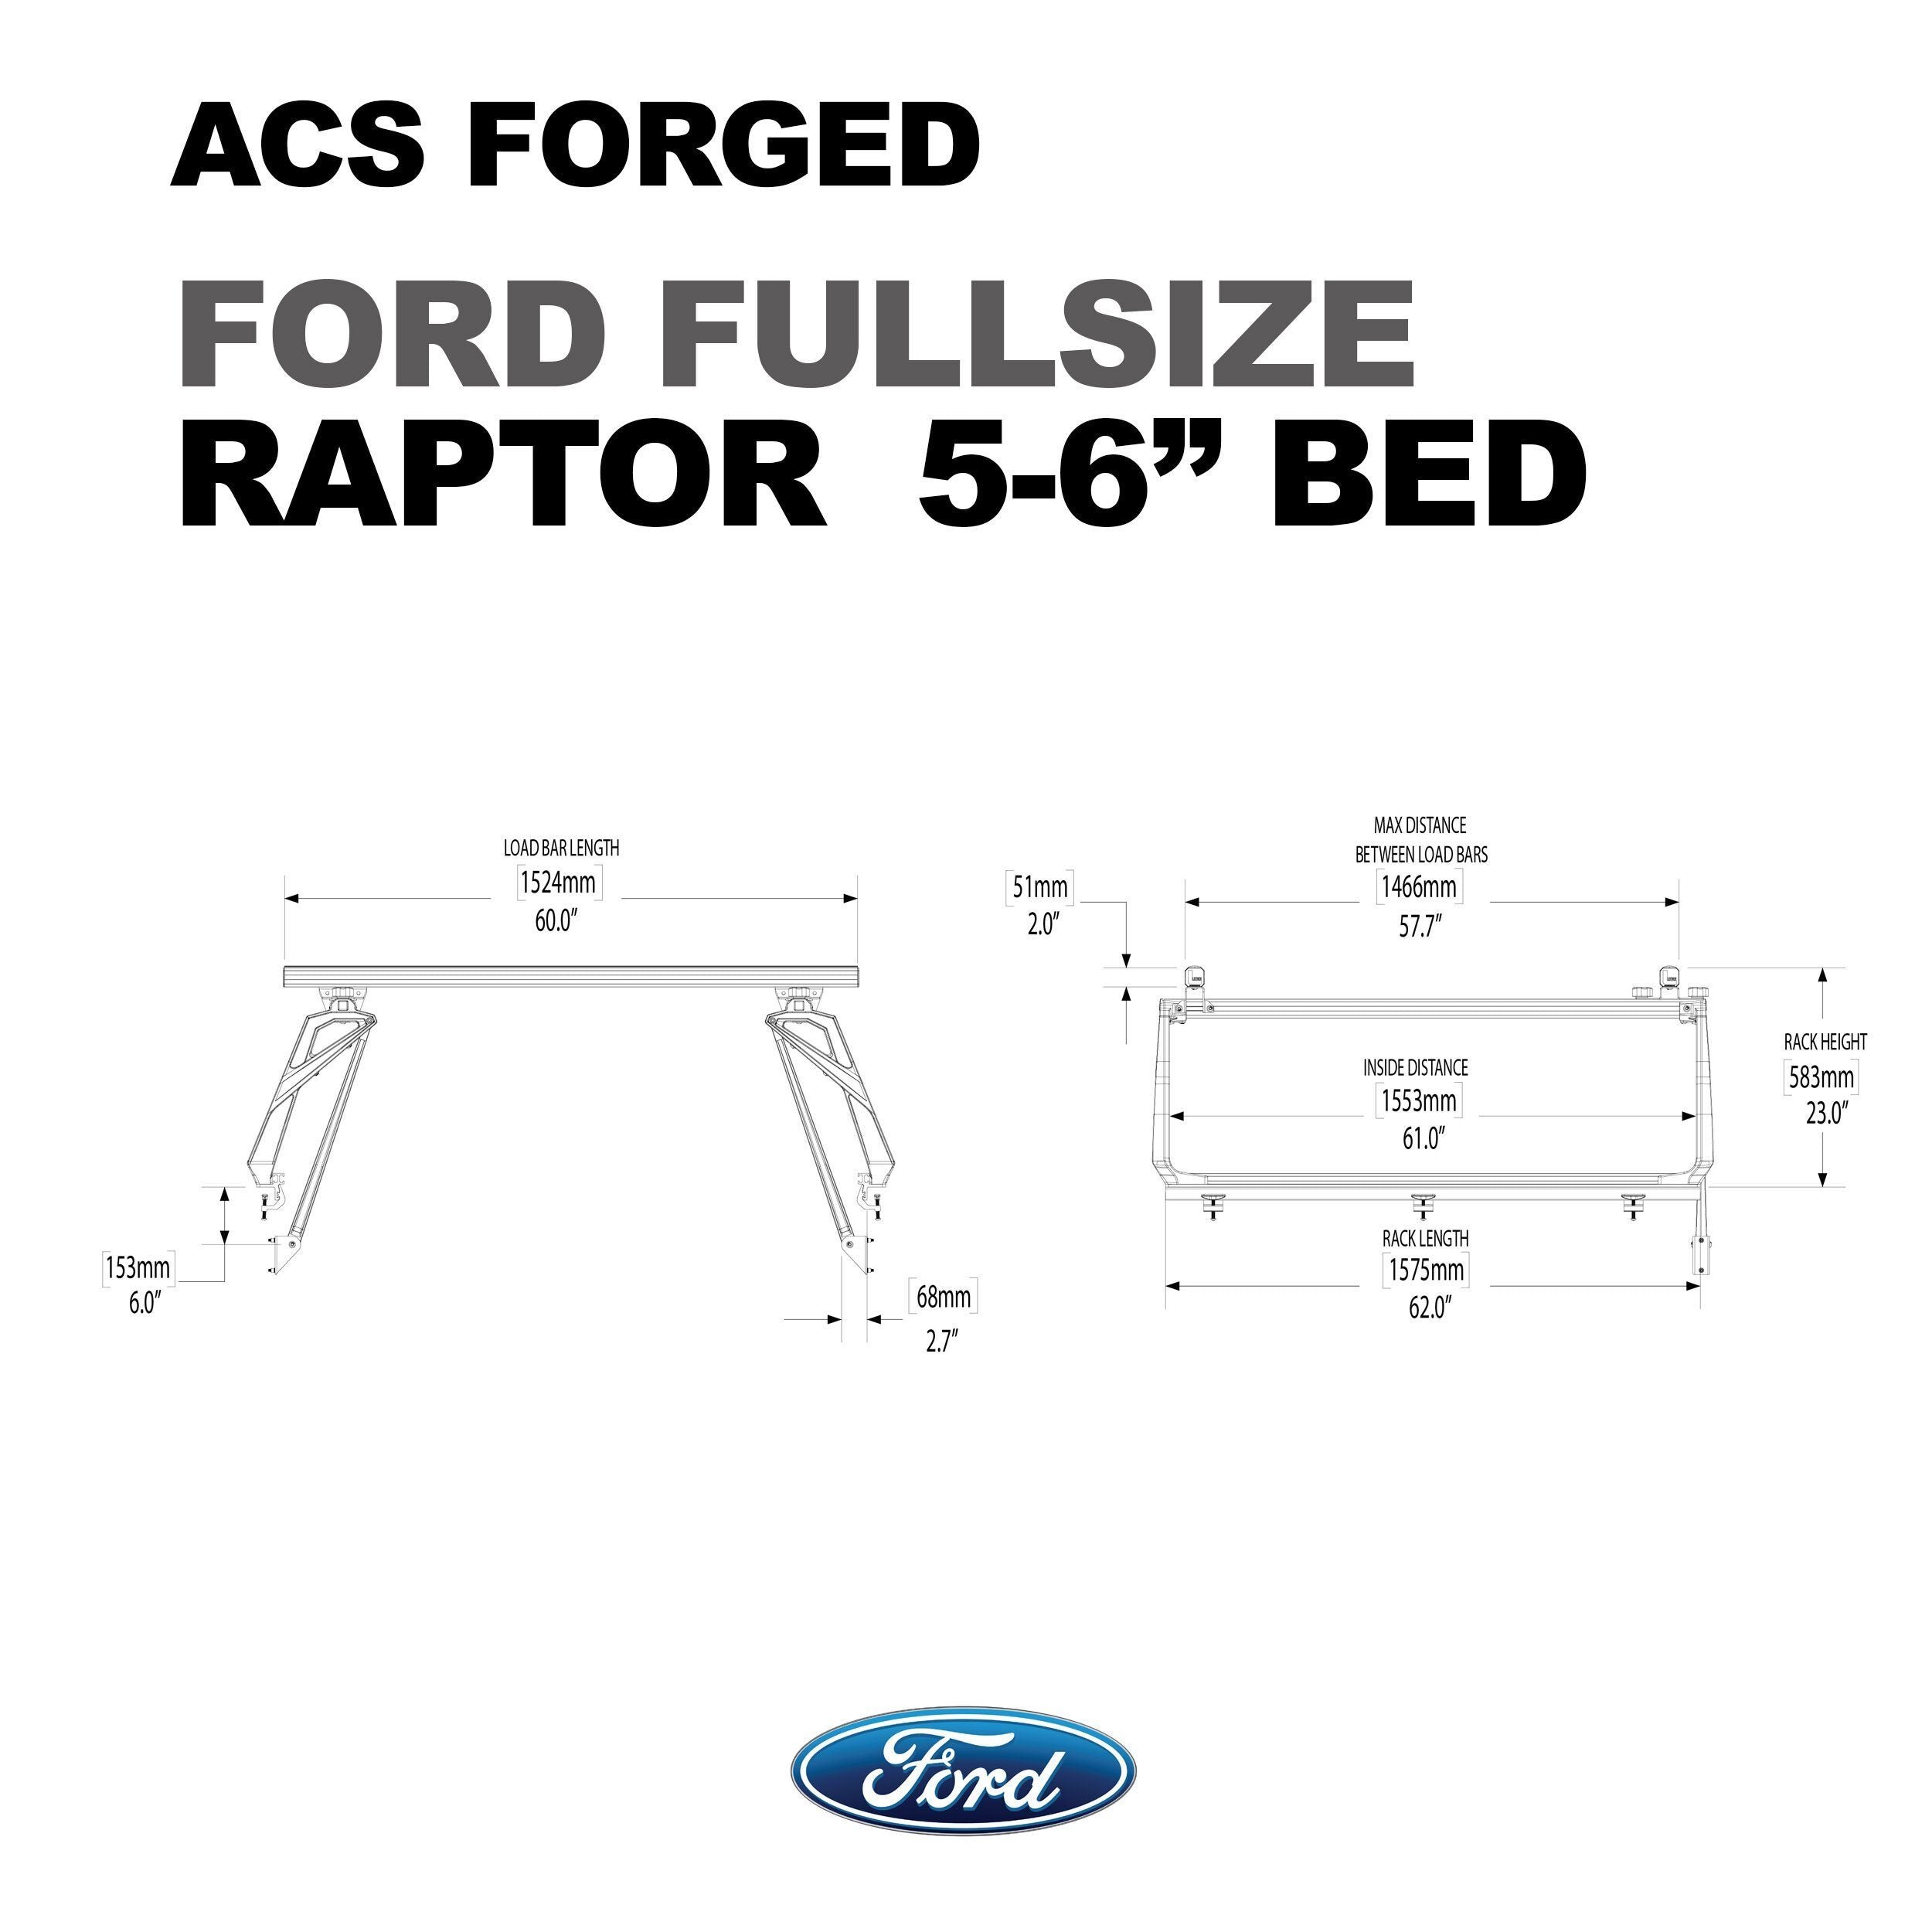 '10-14 Ford Raptor-ACS Forged Bed Accessories Leitner Designs design